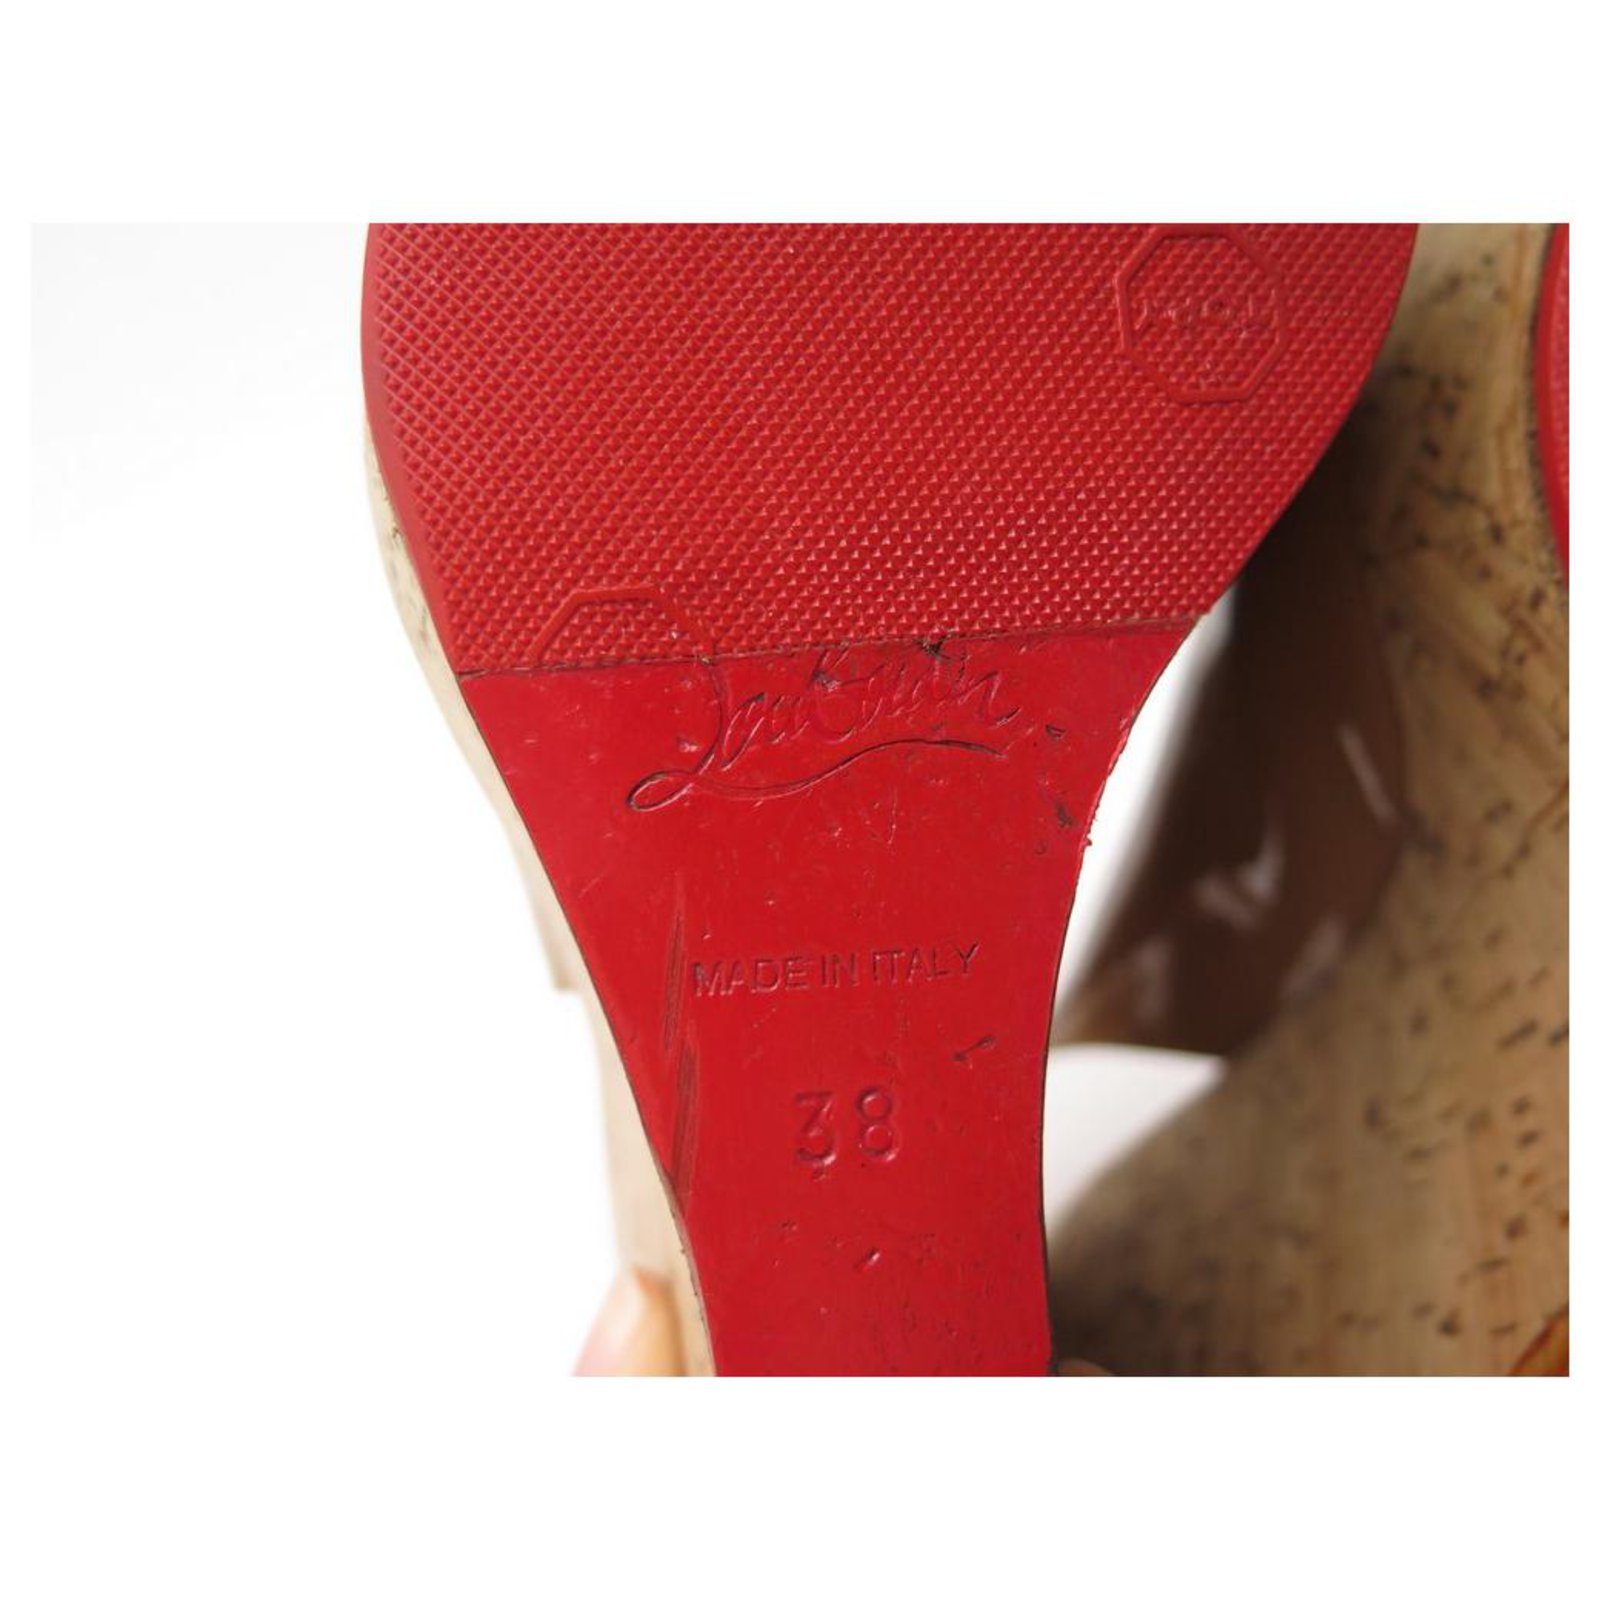 Christian Louboutin Jean Paul 120 Cork Wedge Sandals Red Patent Leather  Size 38